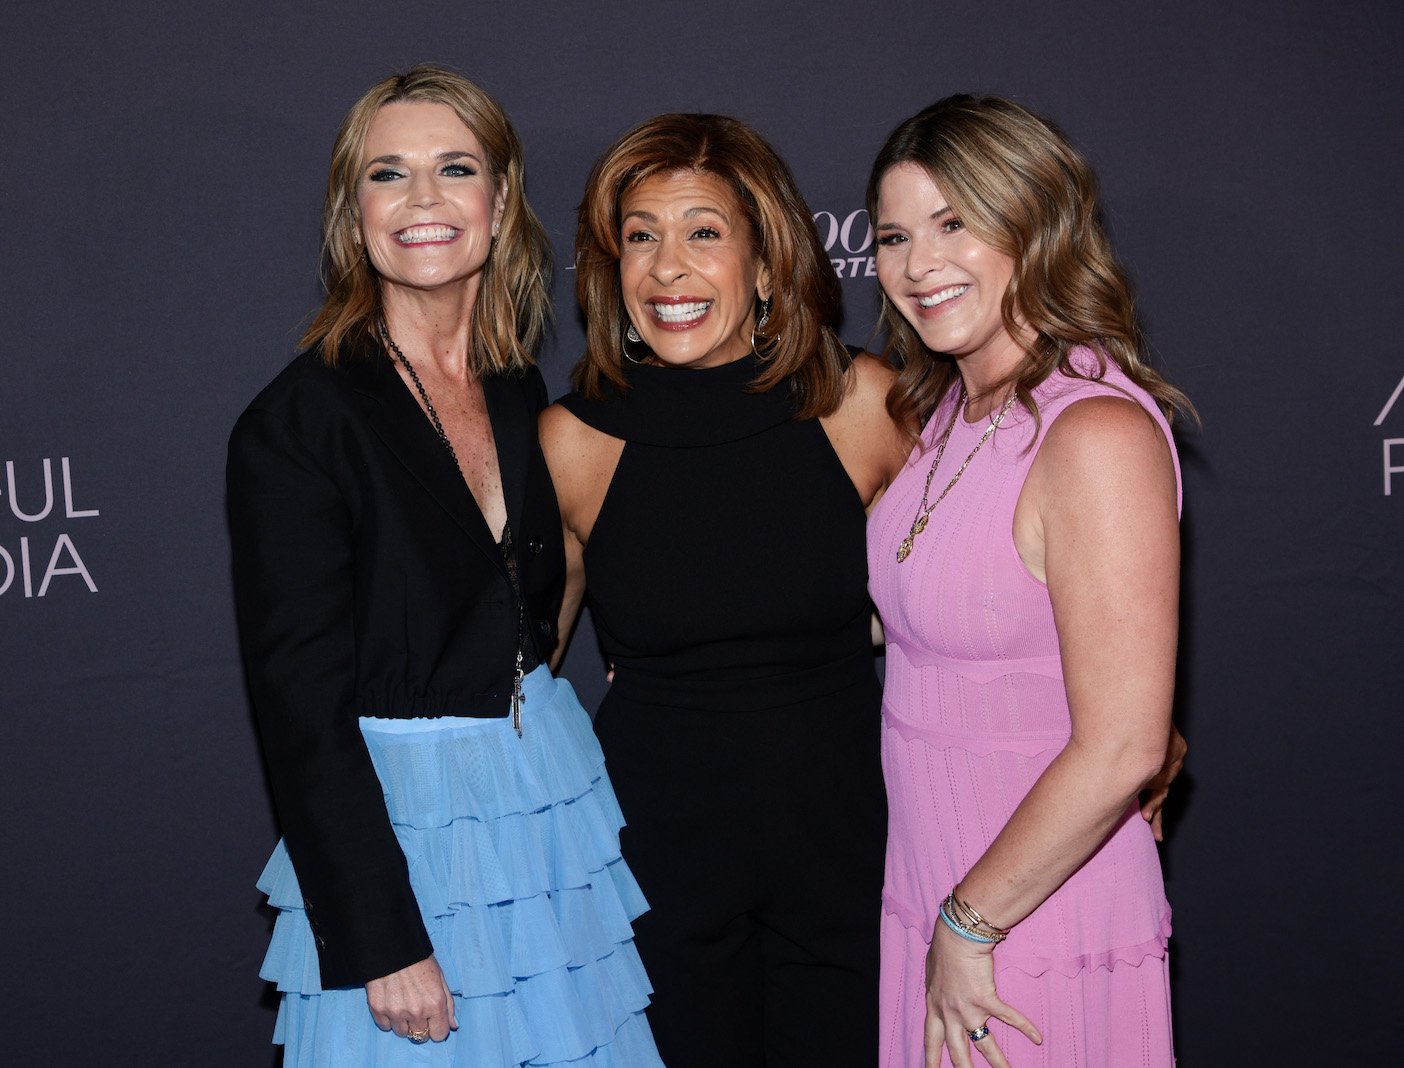 Show Gossip: Jenna Bush Hager Claims Savannah Guthrie and Hoda Kobi Out Of Today’s ‘Today’ For A Bigger Contract